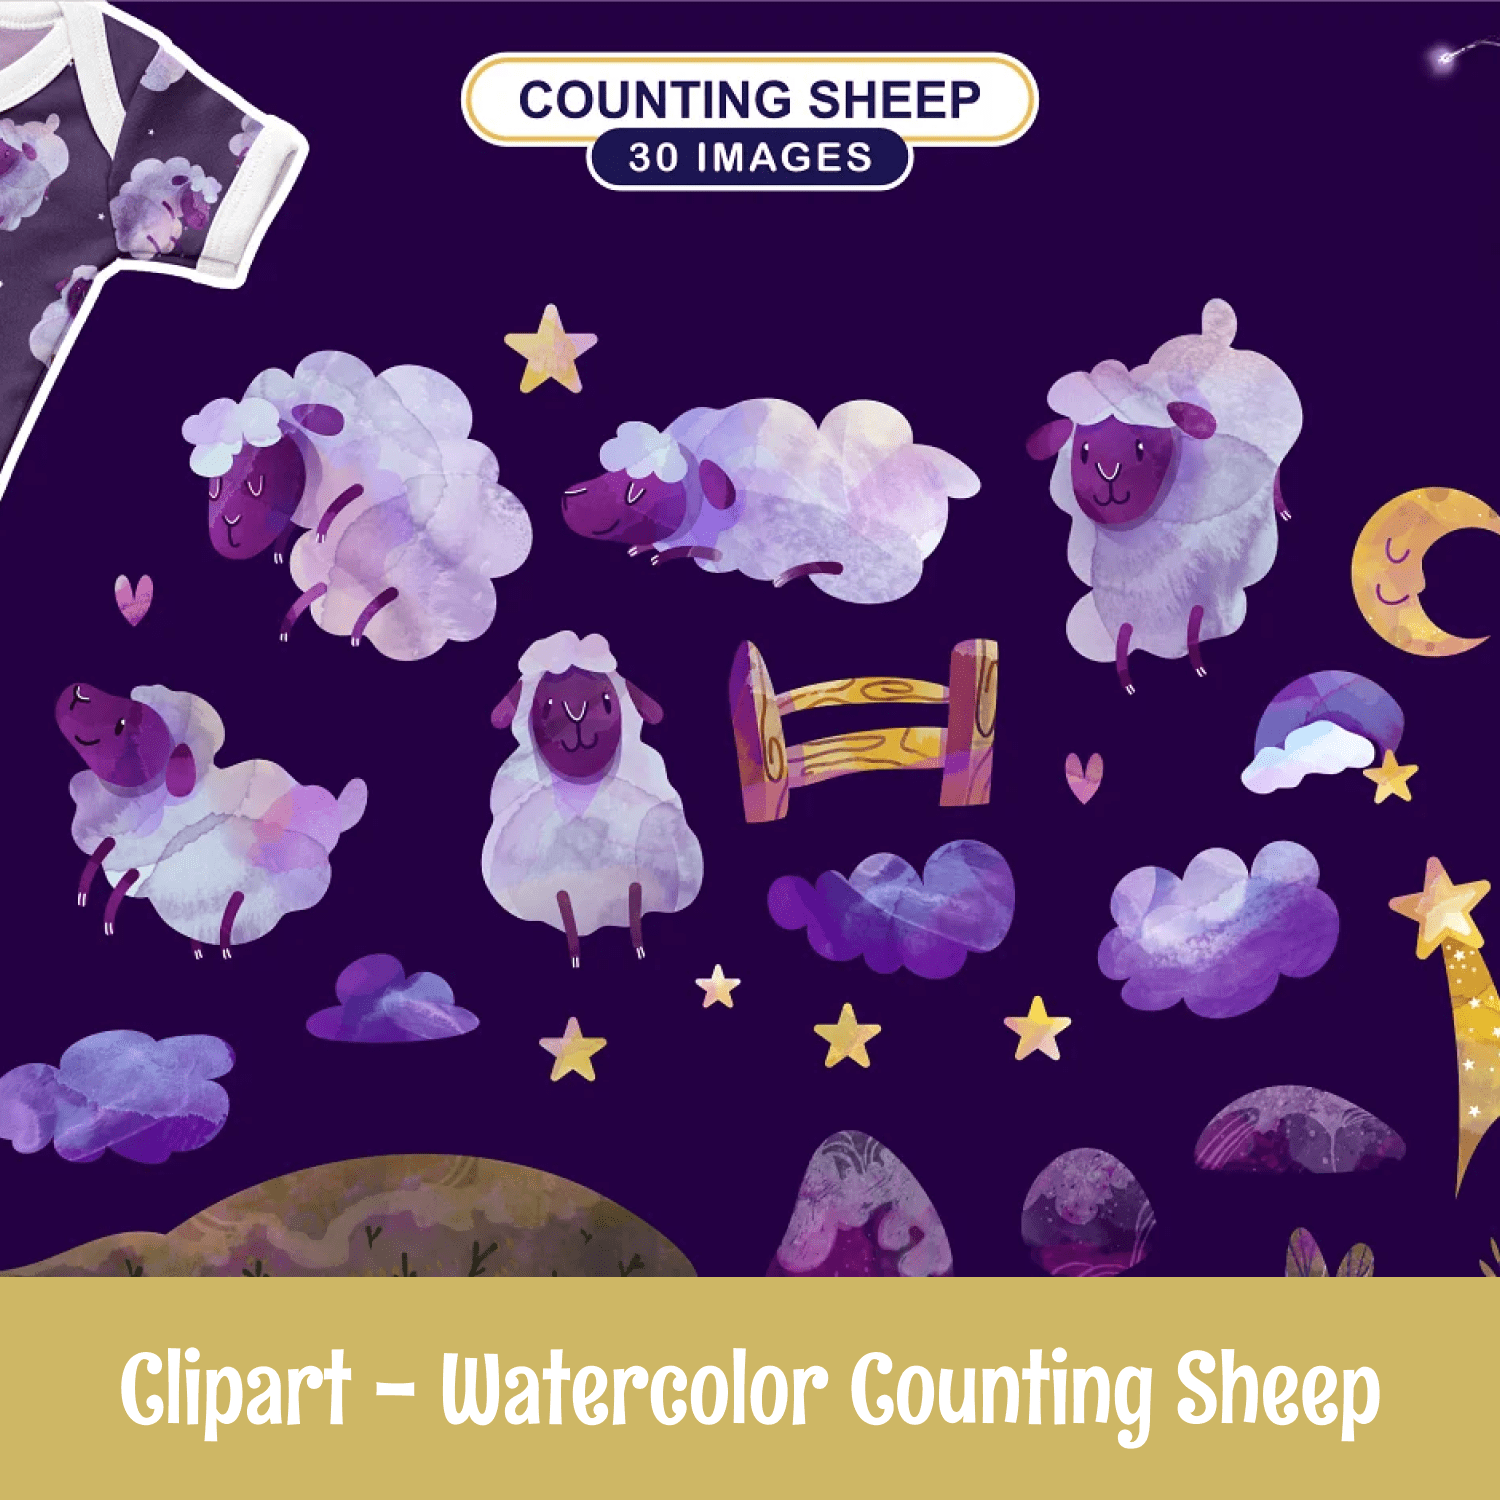 Clipart - Watercolor Counting Sheep cover.